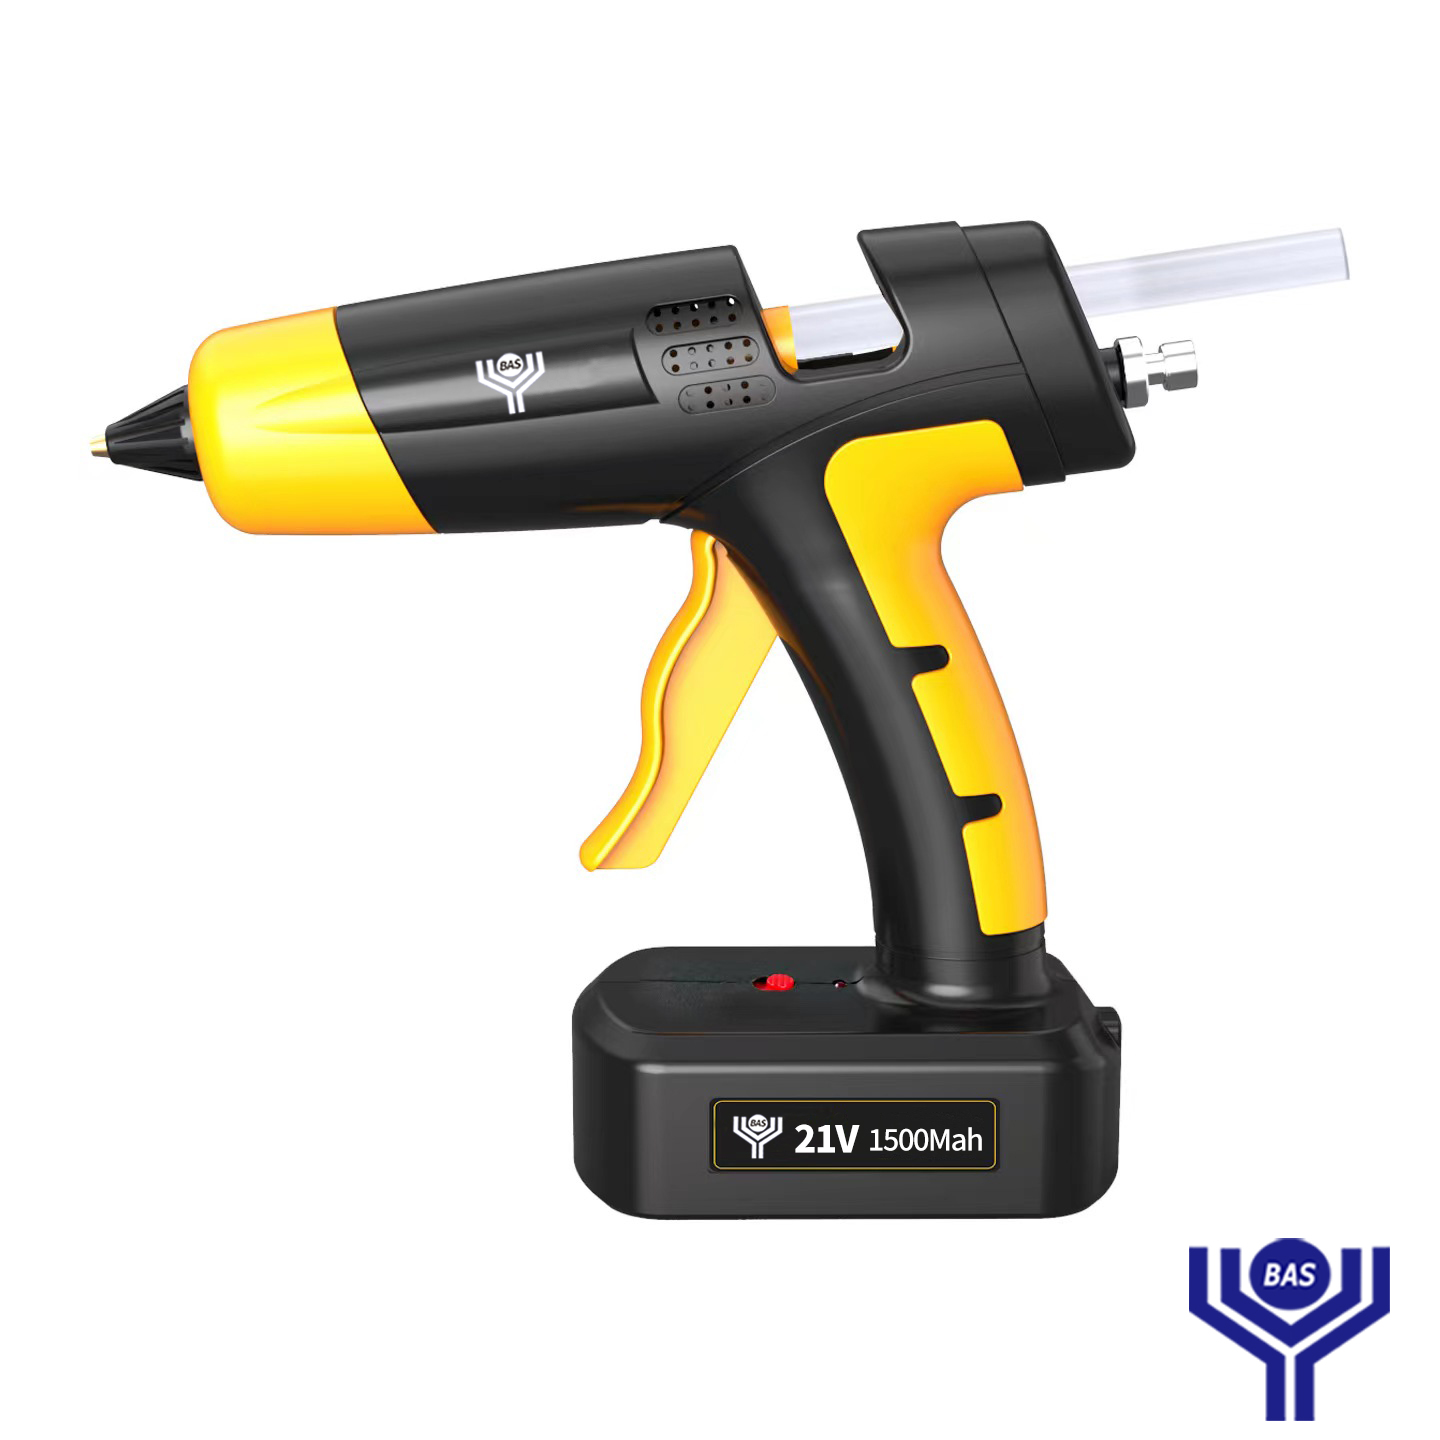  Cordless Glue Gun 20 V with 2 batteries - Professional Quality Power Tools BAS Kuwait